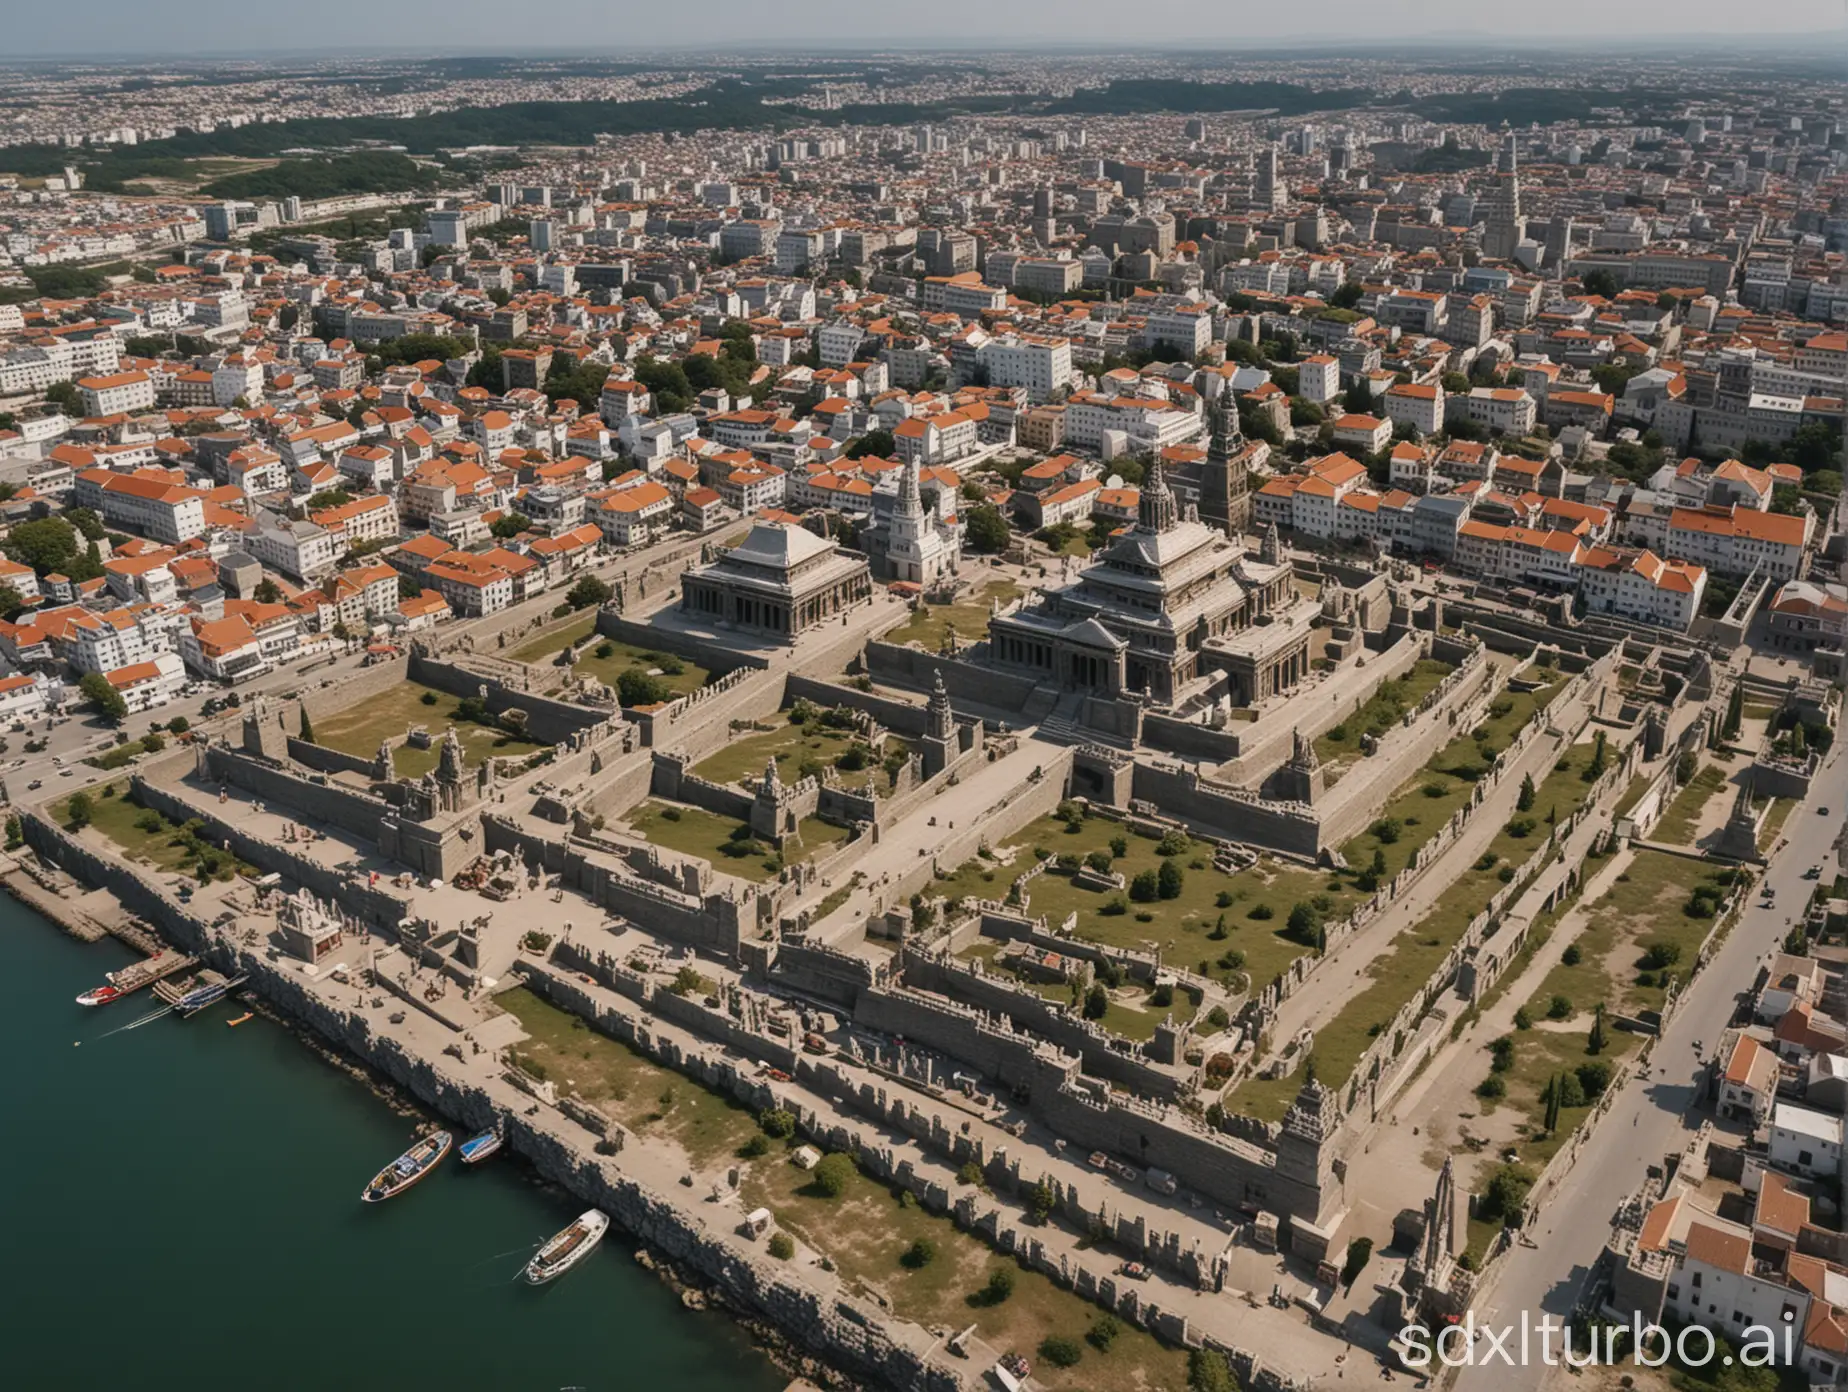 A  Temple complex in the Middle of a medival City just South of a Harbor, the Shot is far away from the temple, shot from a drone